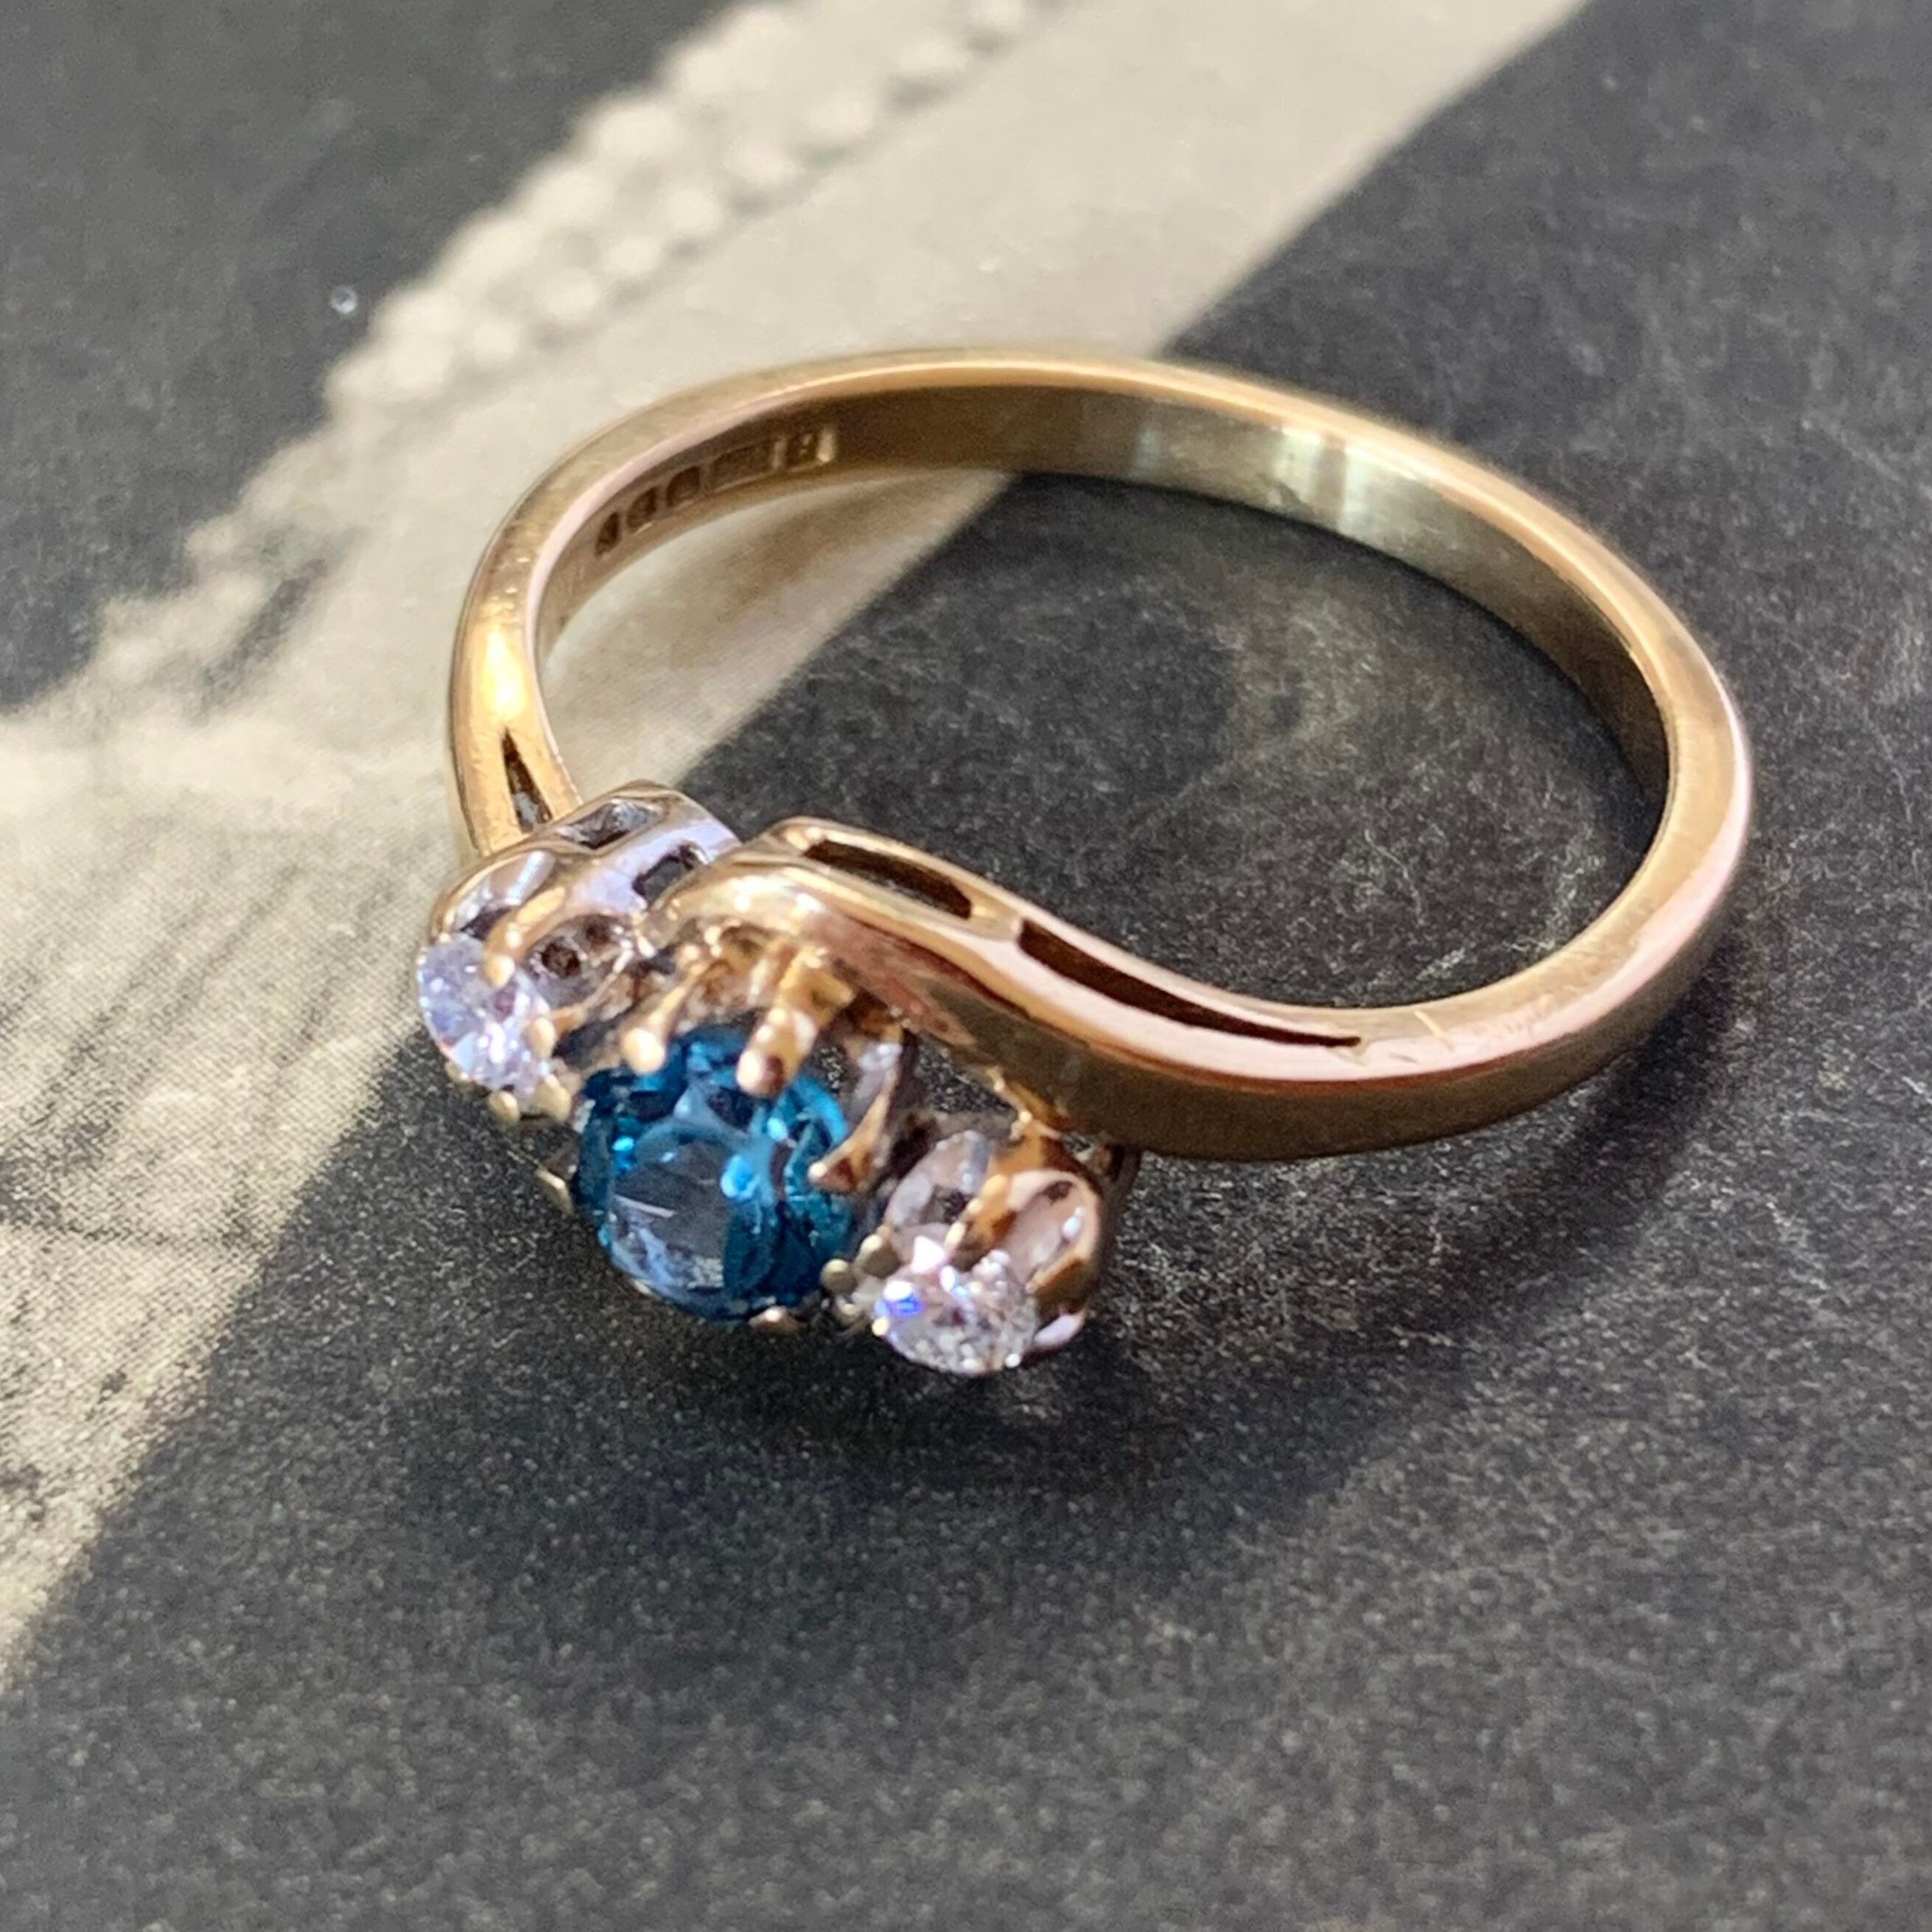 Vintage Engagement Trilogy Ring With A Stunning Combination Of Blue Topaz & Quality Diamonds in Bypass Twist Set 9Ct Yellow Gold